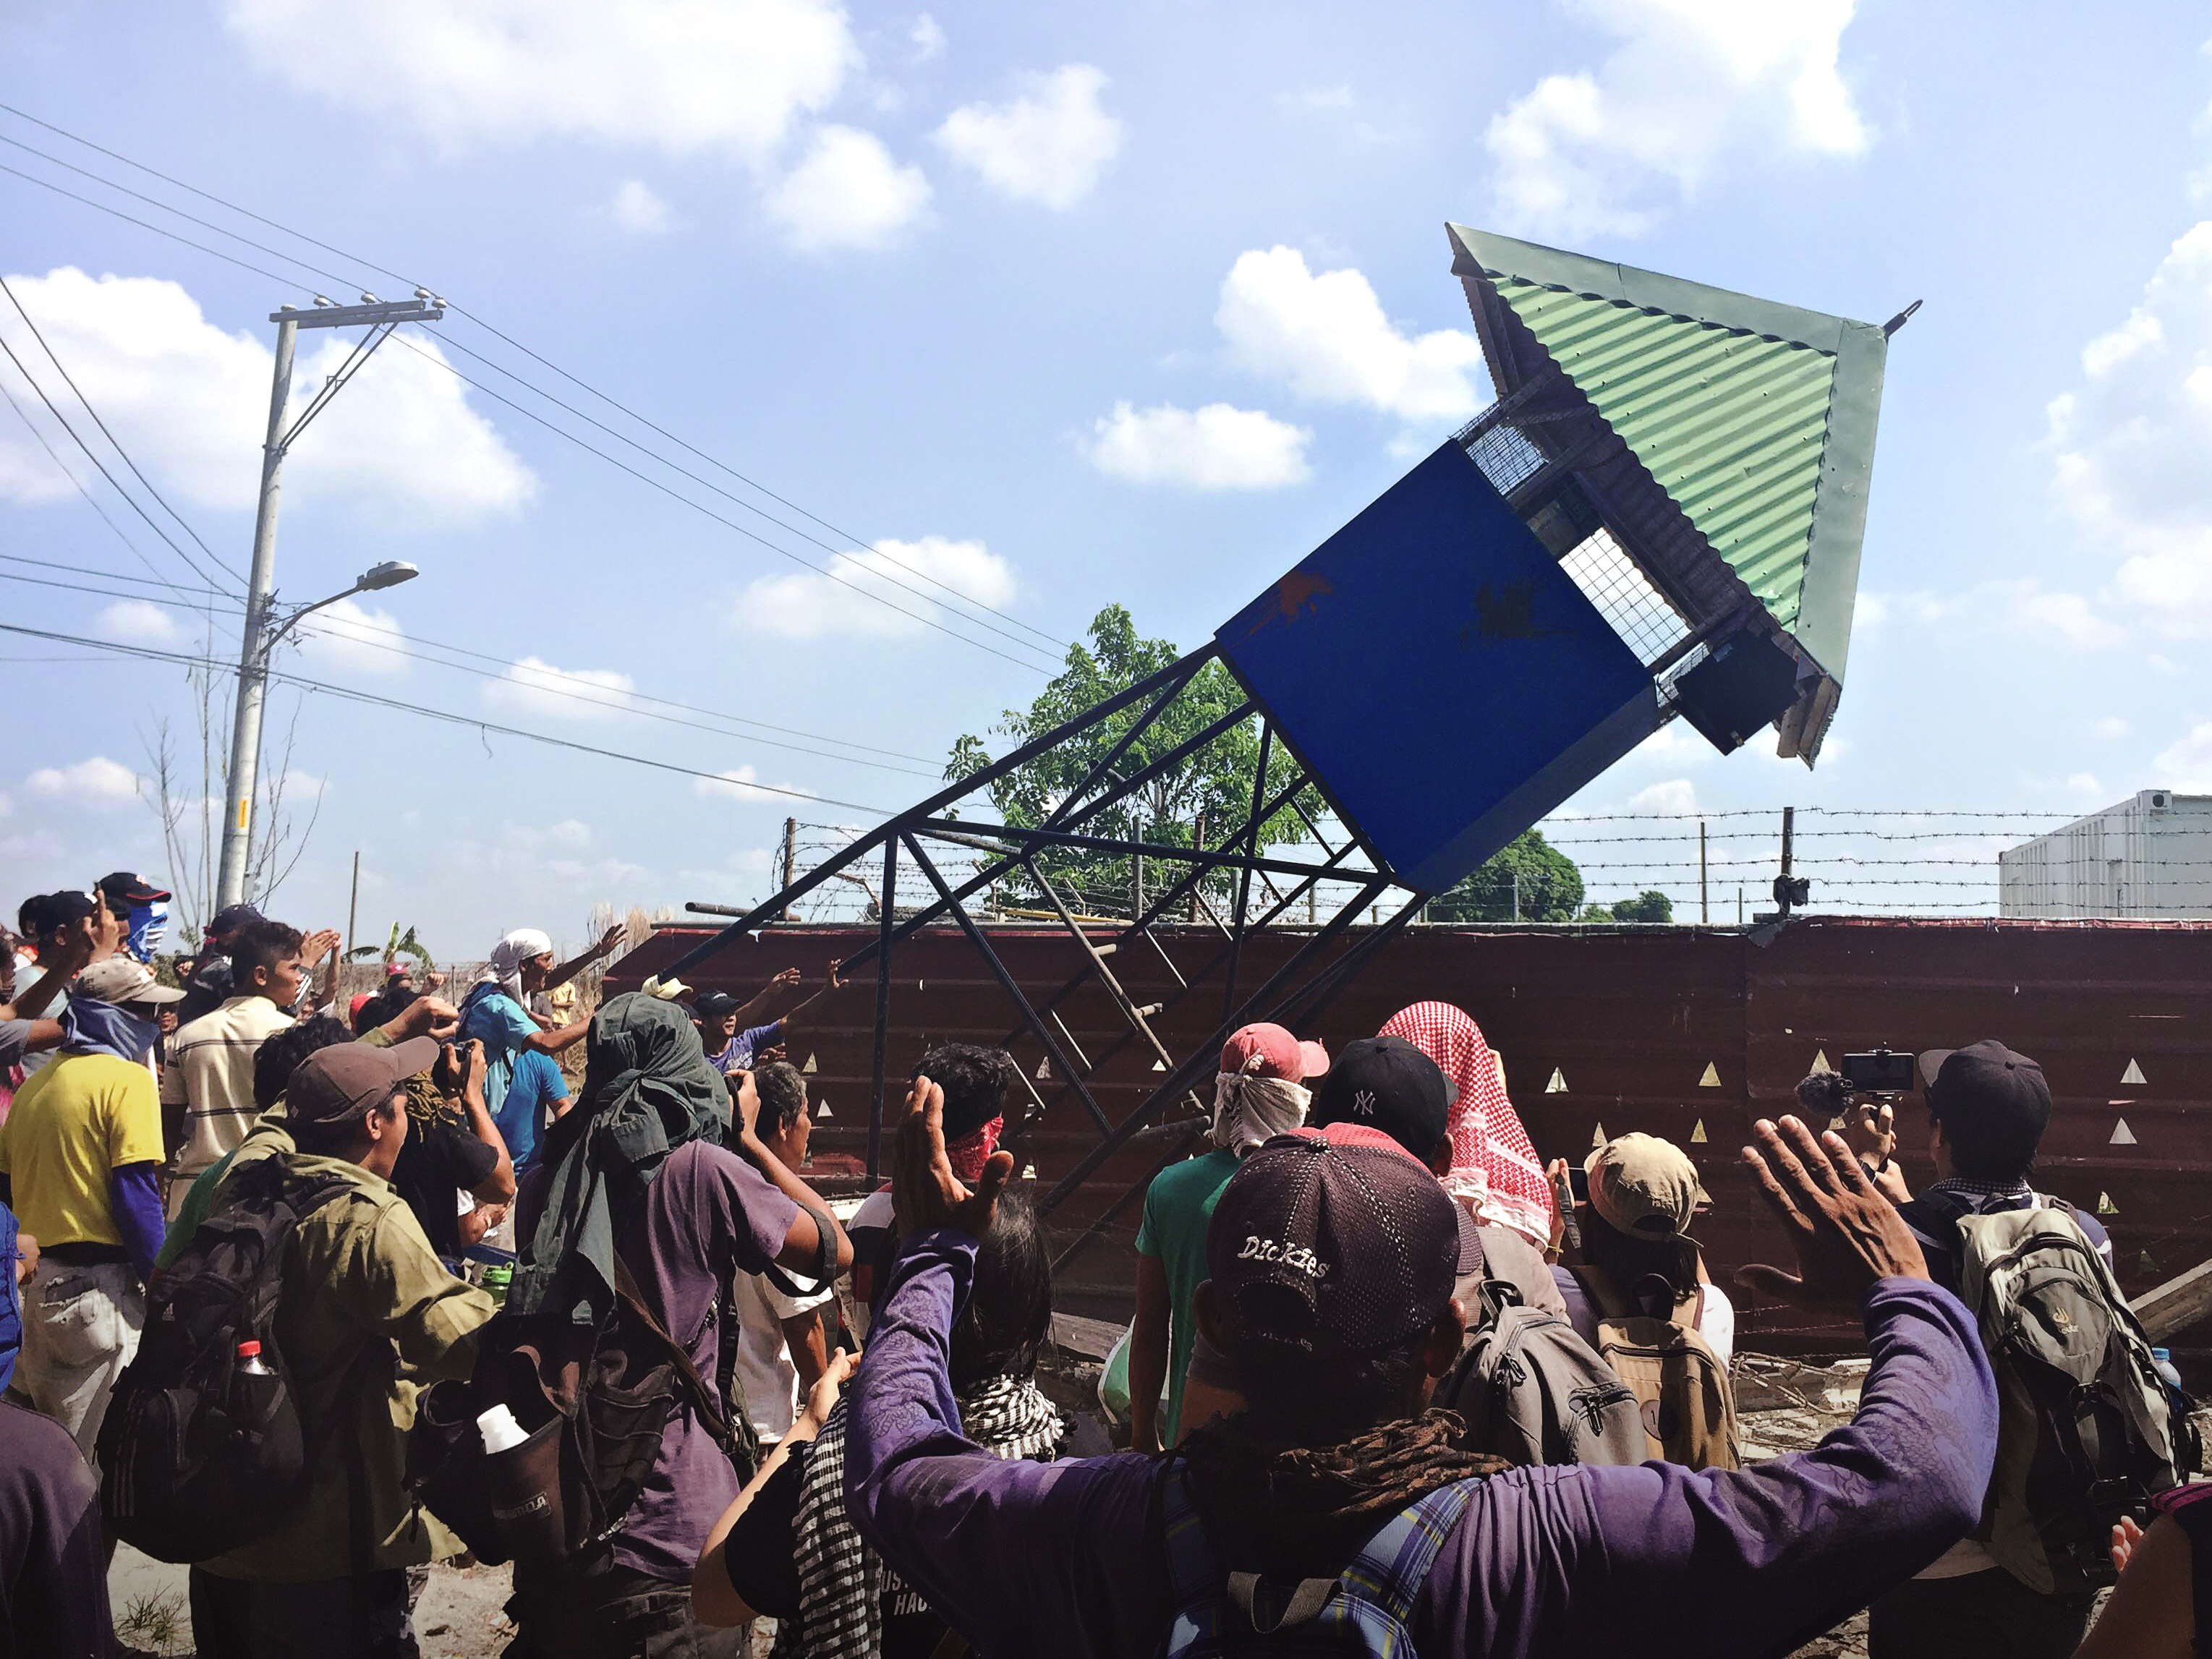 The watch tower inside the RCBC compound topples down amid cheering farm workers inside Hacienda Luisita on April 24, 2017 (Photo by Amihan Mabalay/Bulatlat)